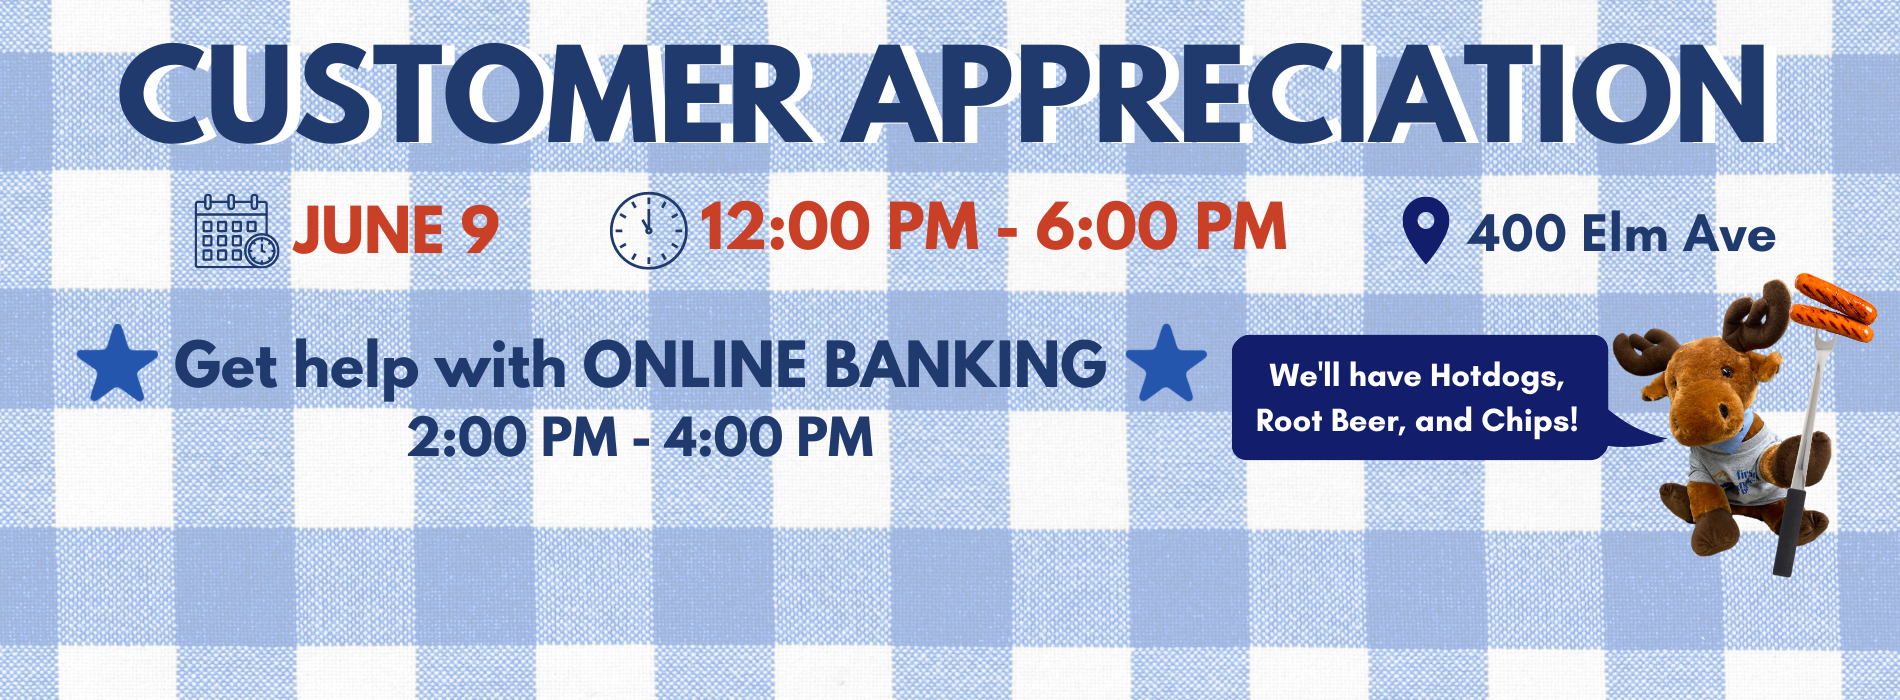 Customer Appreciation is on June 9, 2023 from 12pm - 6pm at 400 Elm Avenue. Hotdogs, chips, and rootbeer will be served. Get help with your online banking from 2pm - 4pm. 